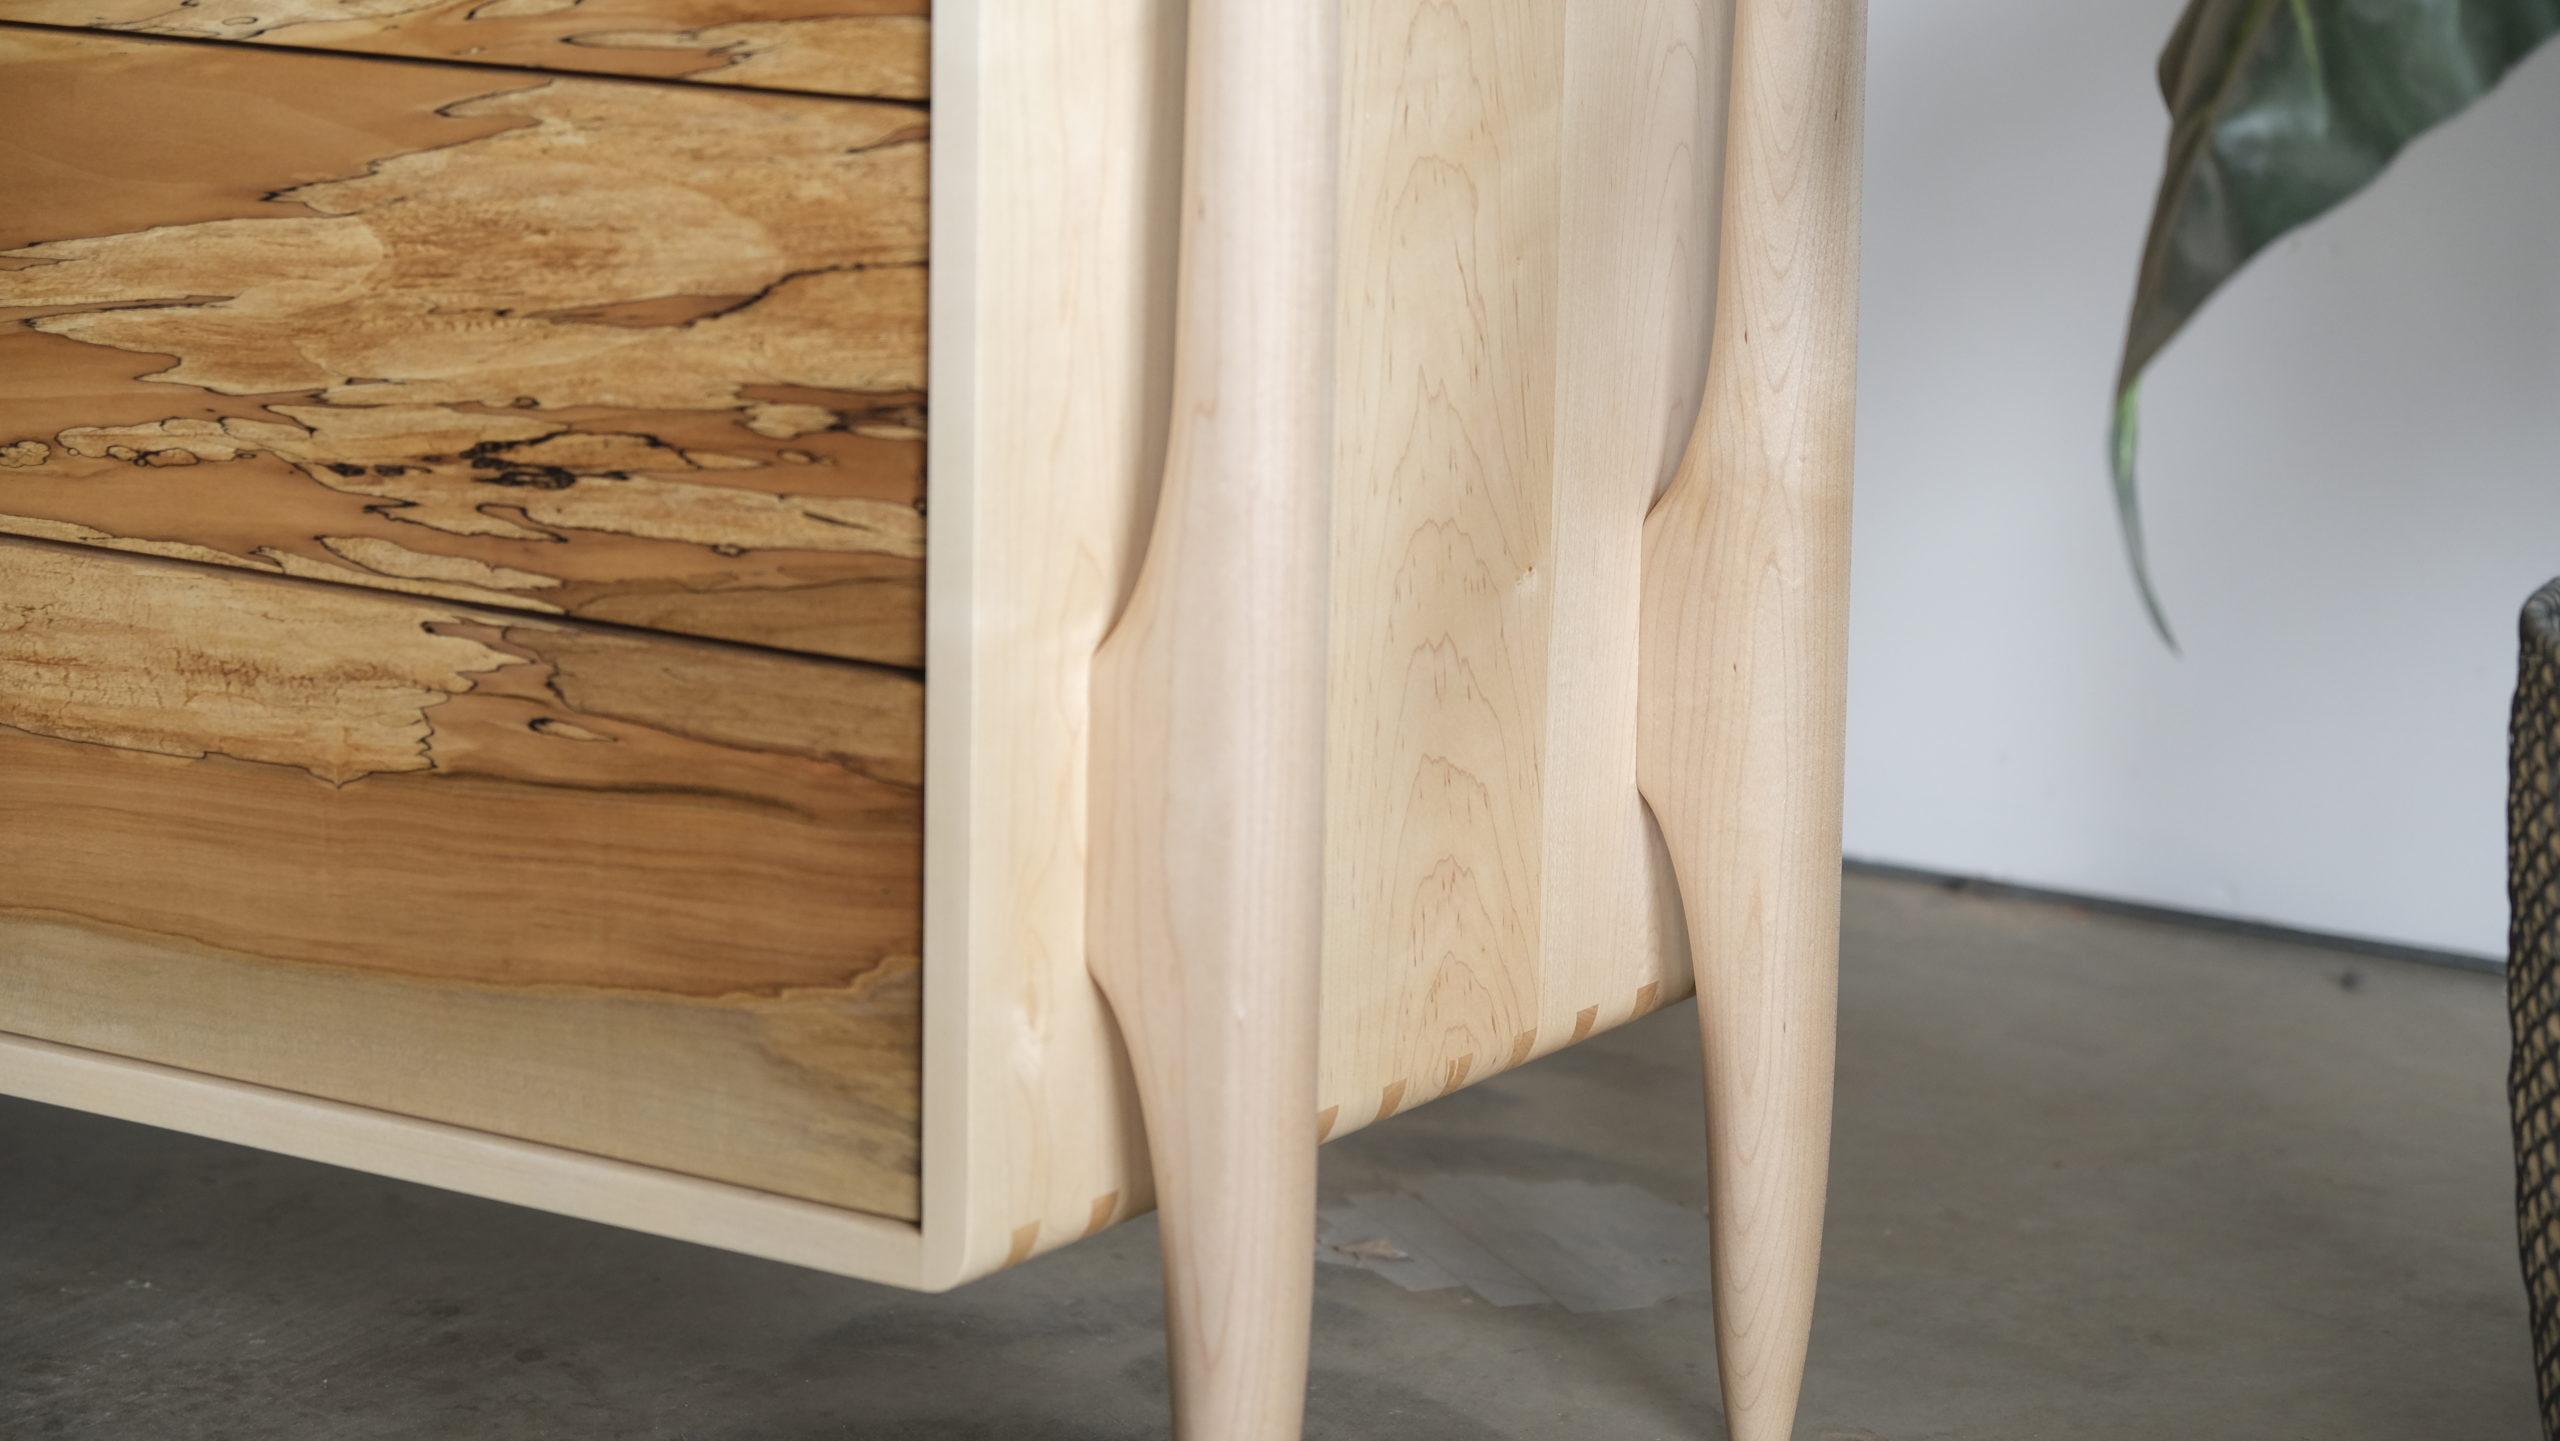 Close-up of the hand turned exposed dresser legs in maple